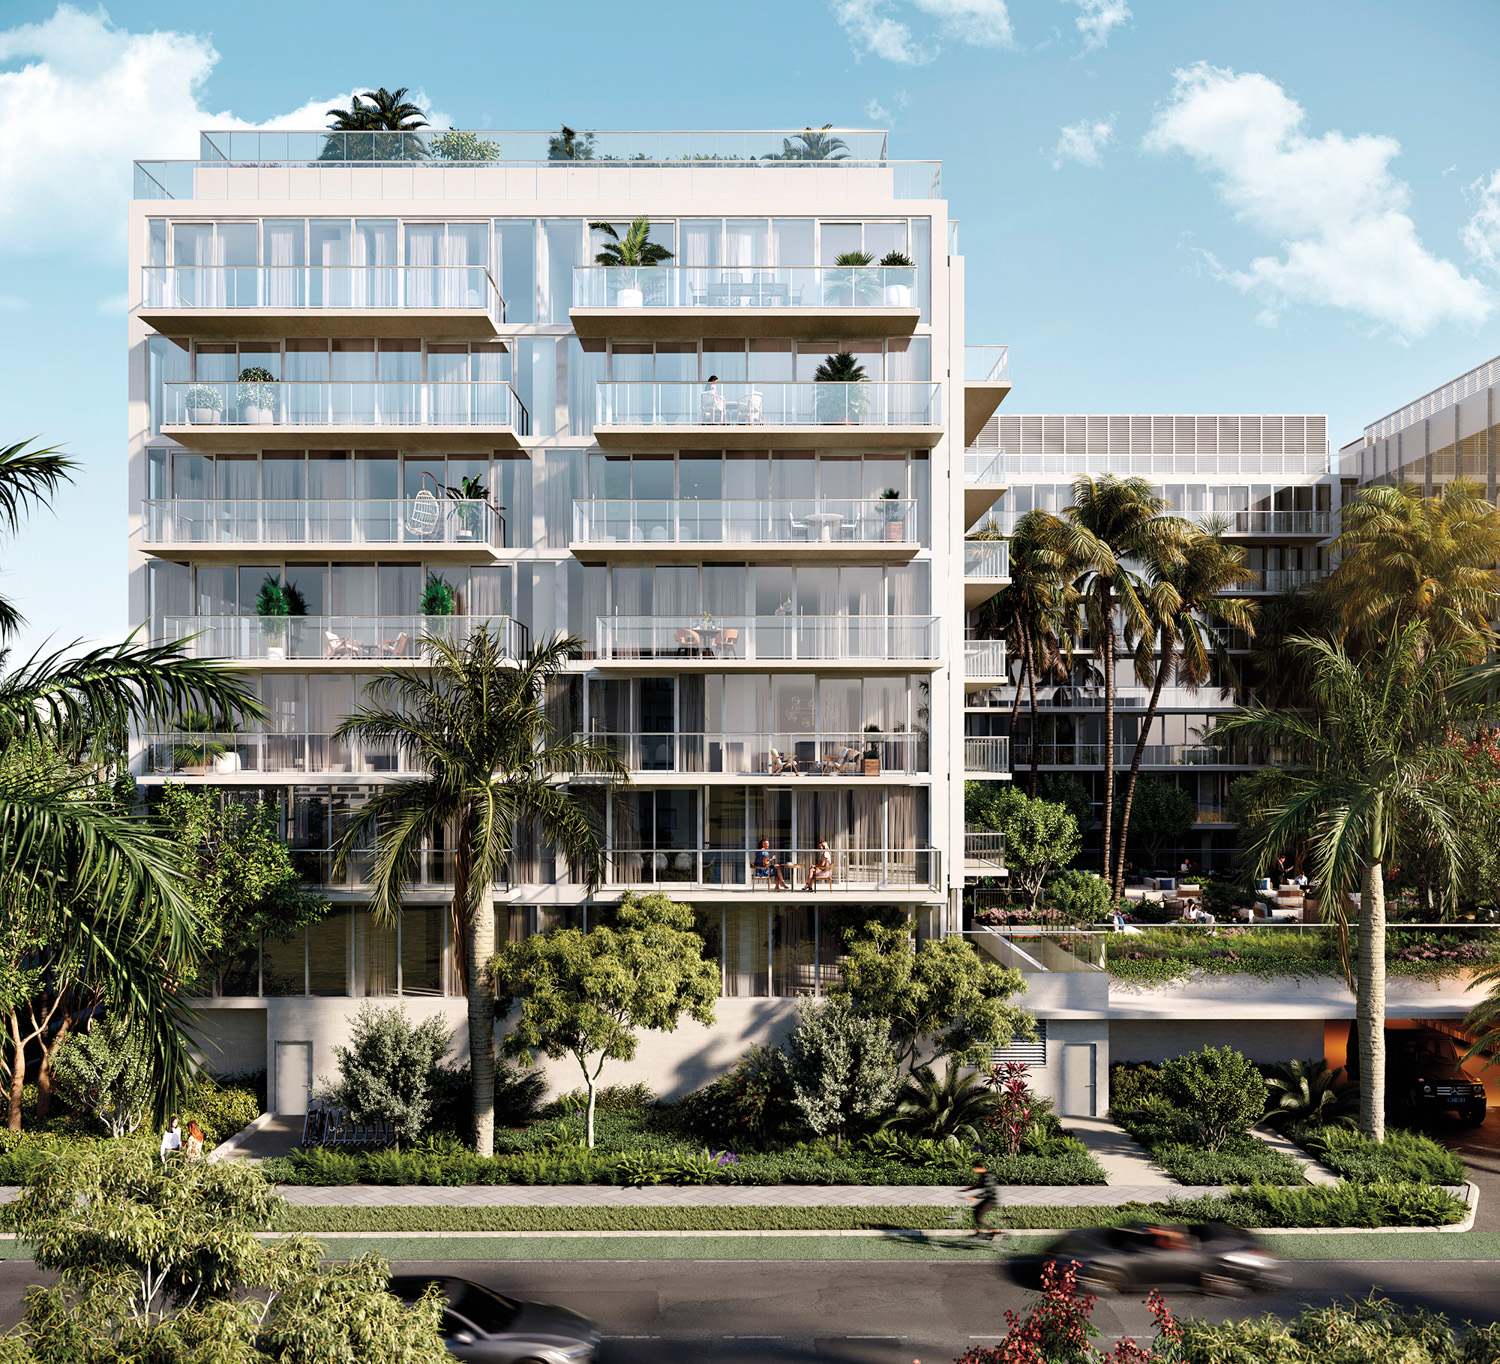 Exterior of The Well Bay Harbor Islands residence building with floor-to-ceiling windows and private balconies